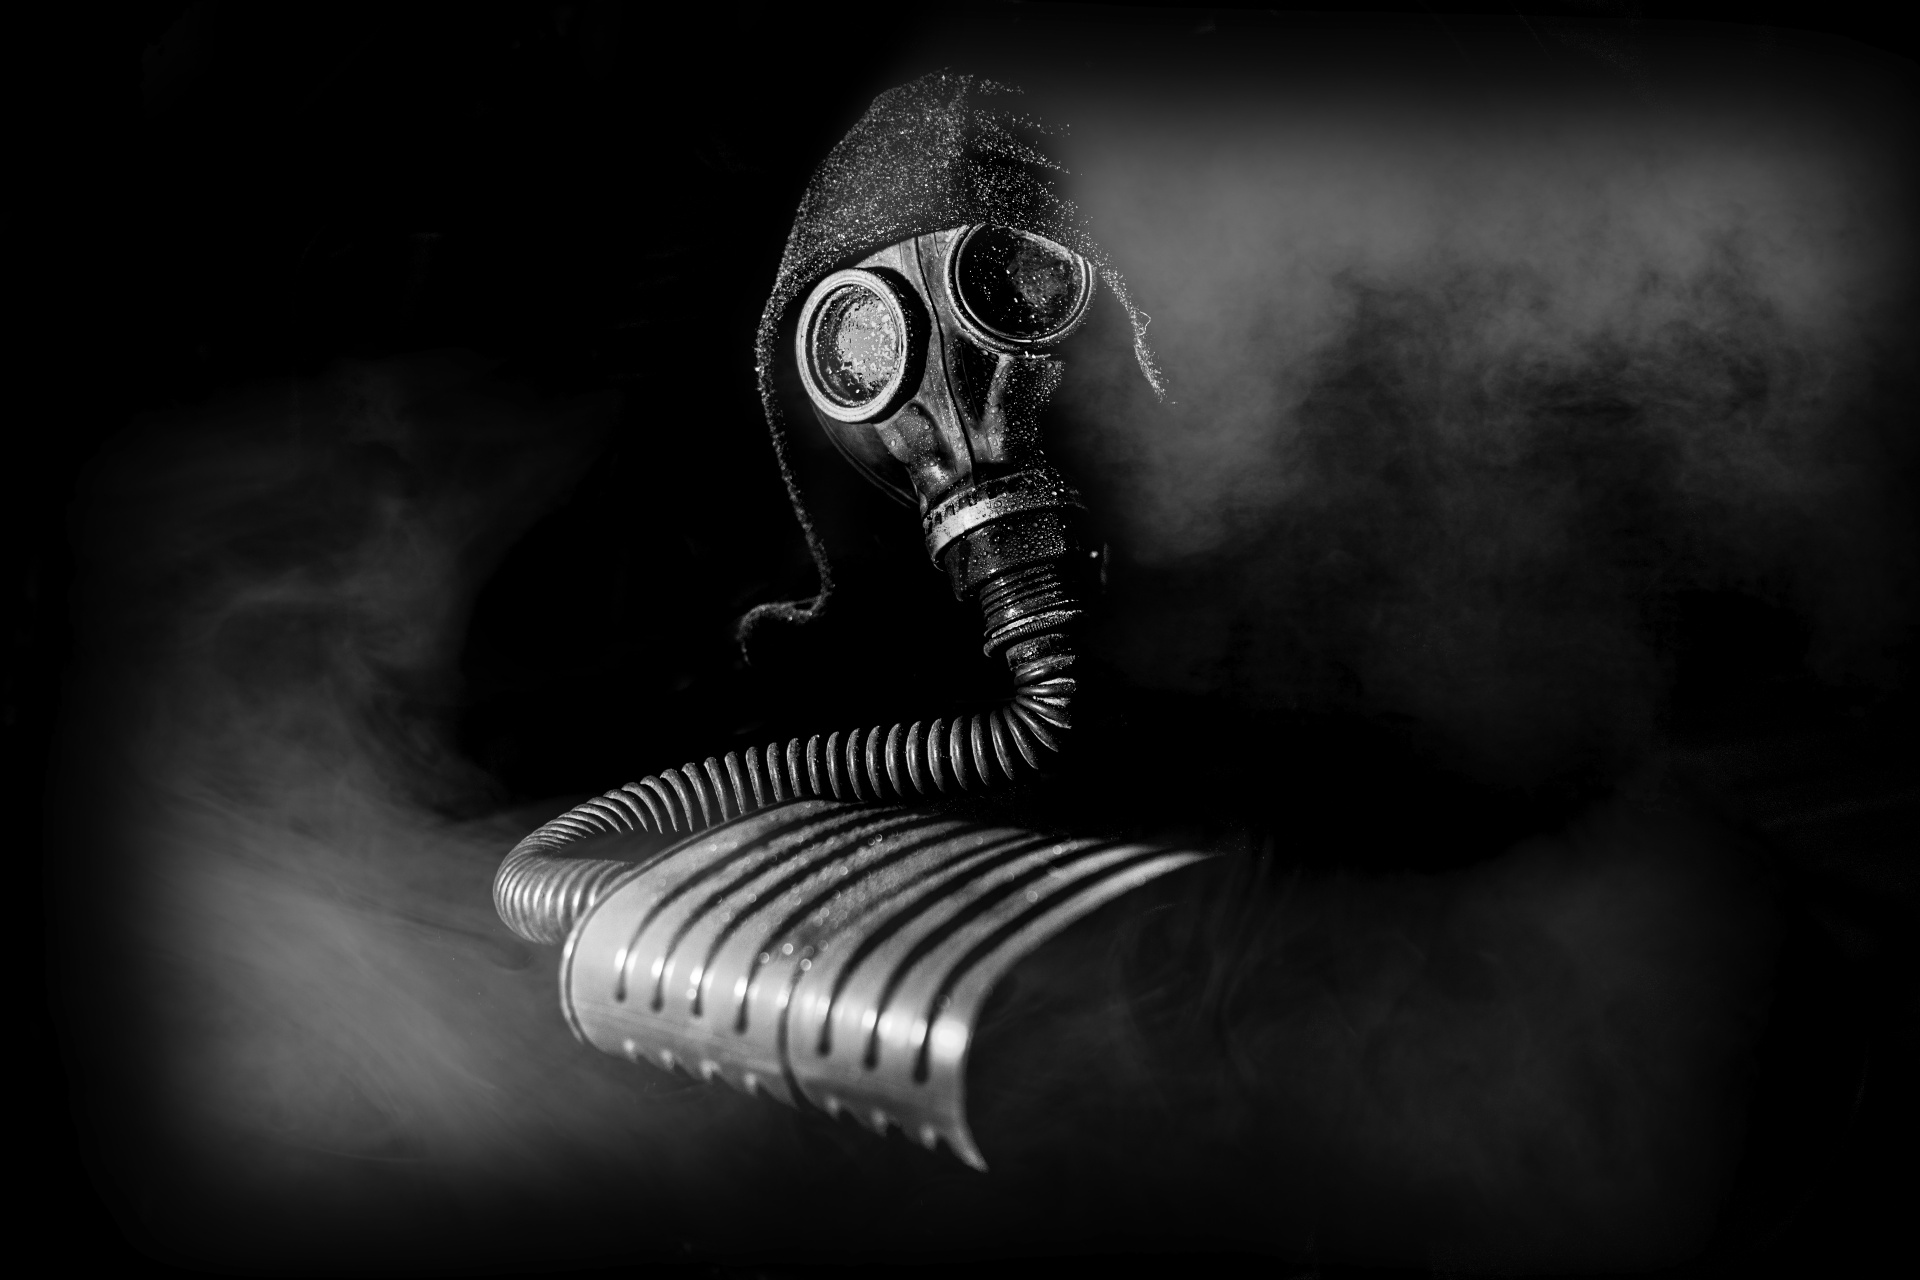 Gas mask is a mask used to protect the user from inhaling airborne pollutants and toxic gases